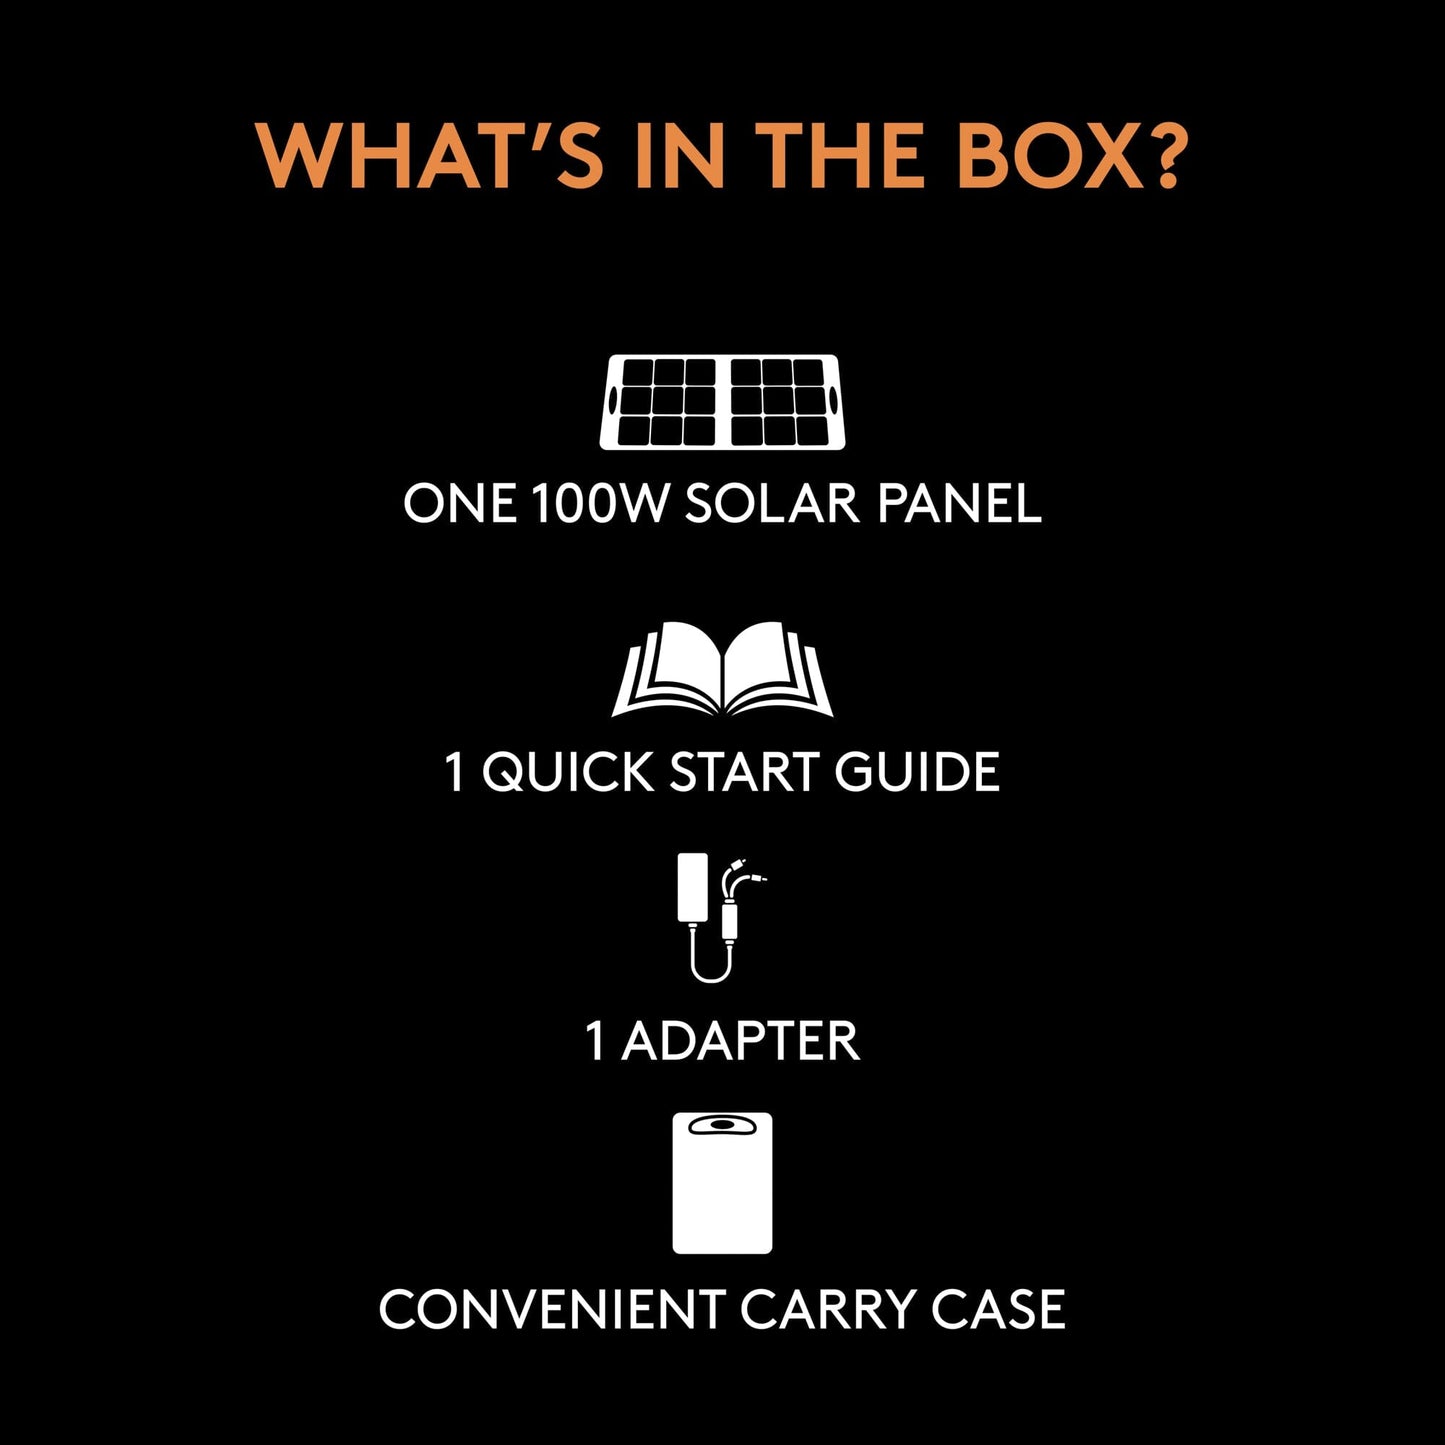 Graphic showing what's in the box. Te box includes a solar panel, a quick start guide, an adapter, and a convenient carry-case.